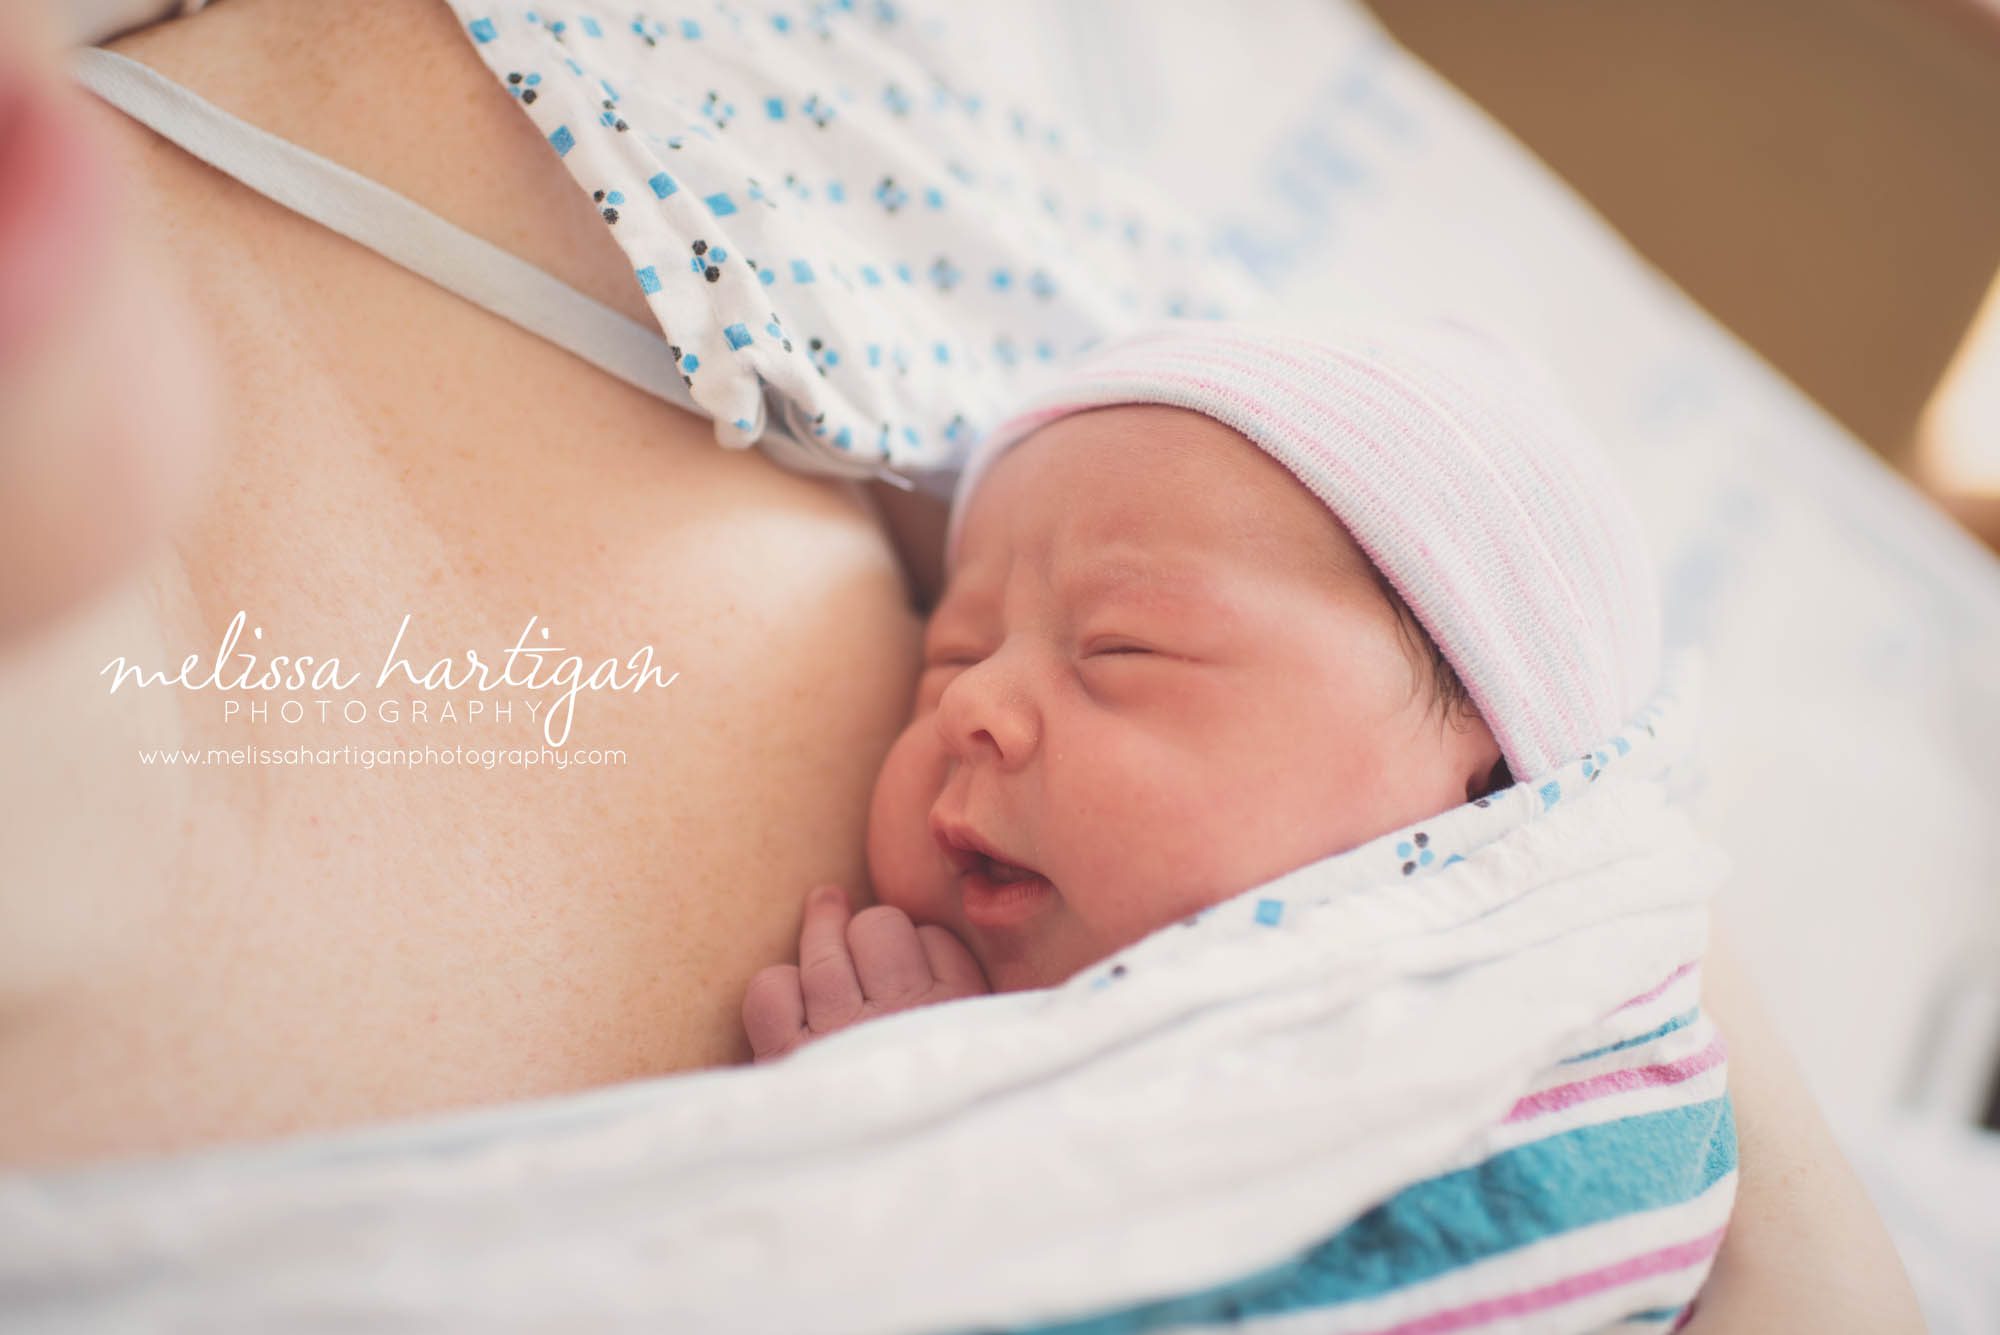 Melissa Hartigan Photography Connecticut Maternity and Newborn Photographer Piper Fresh 48 Newborn Session Mom holding baby on chest under blanket close up